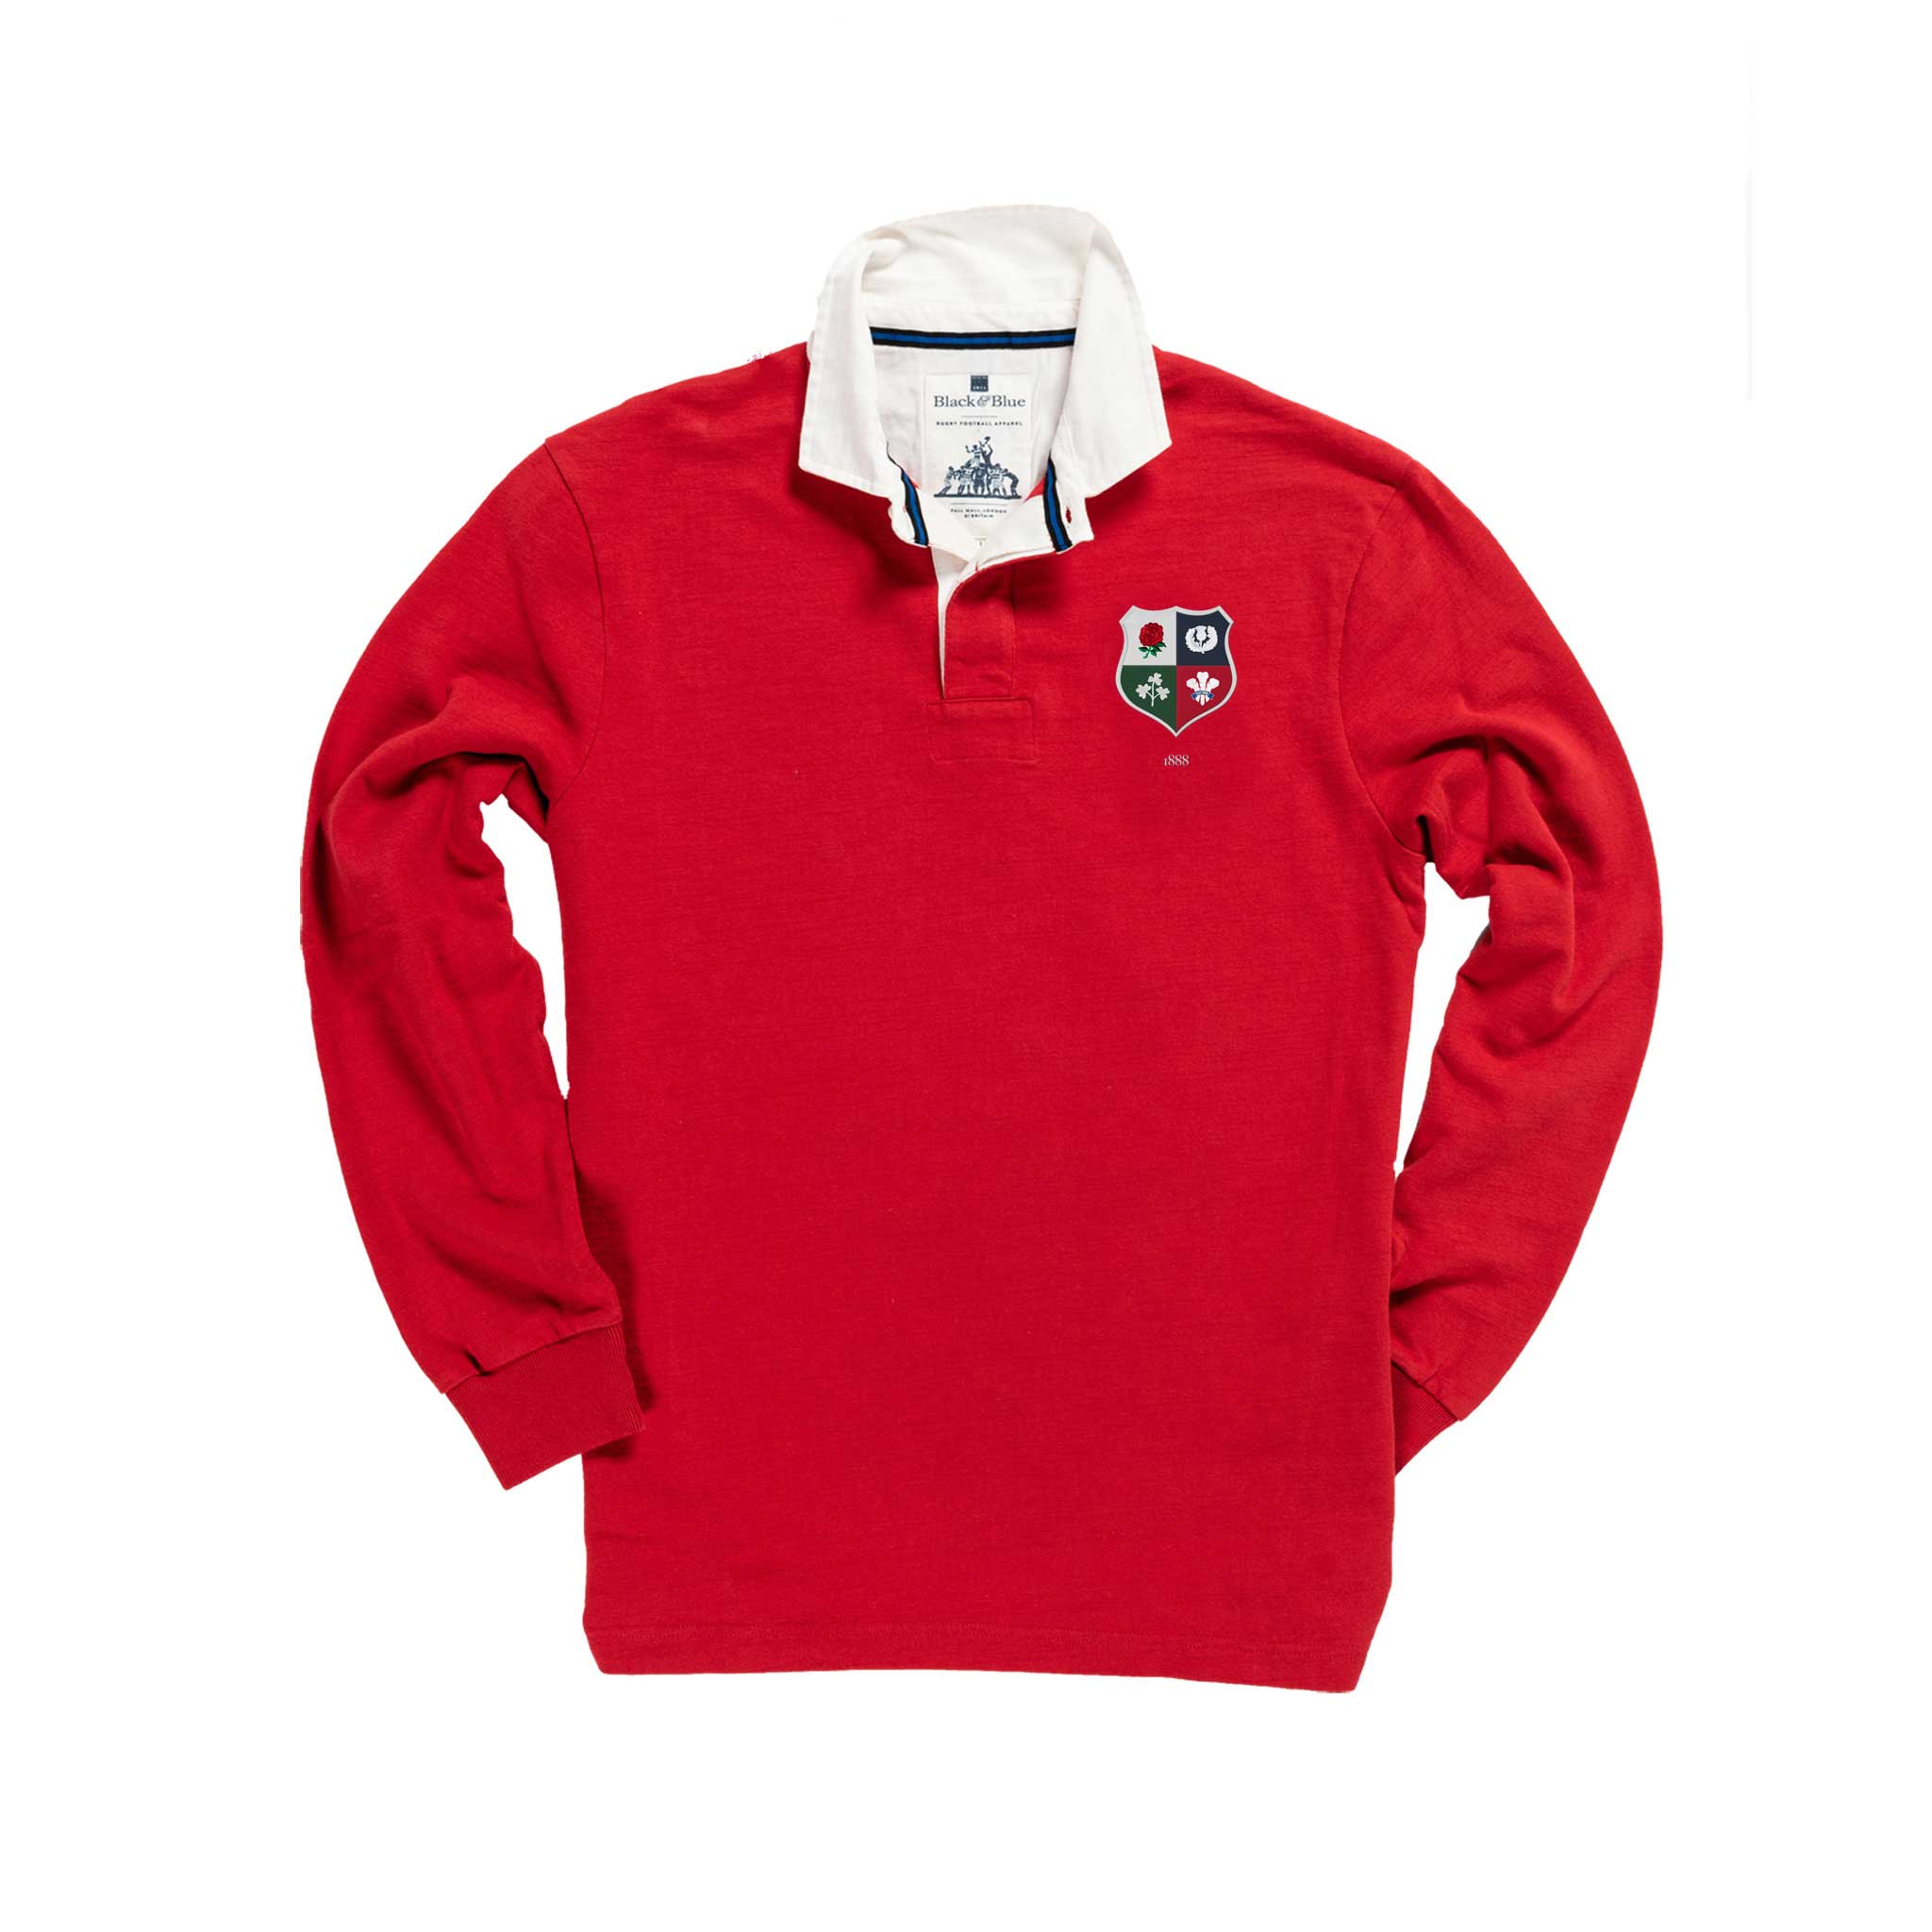 rugby lions shirt